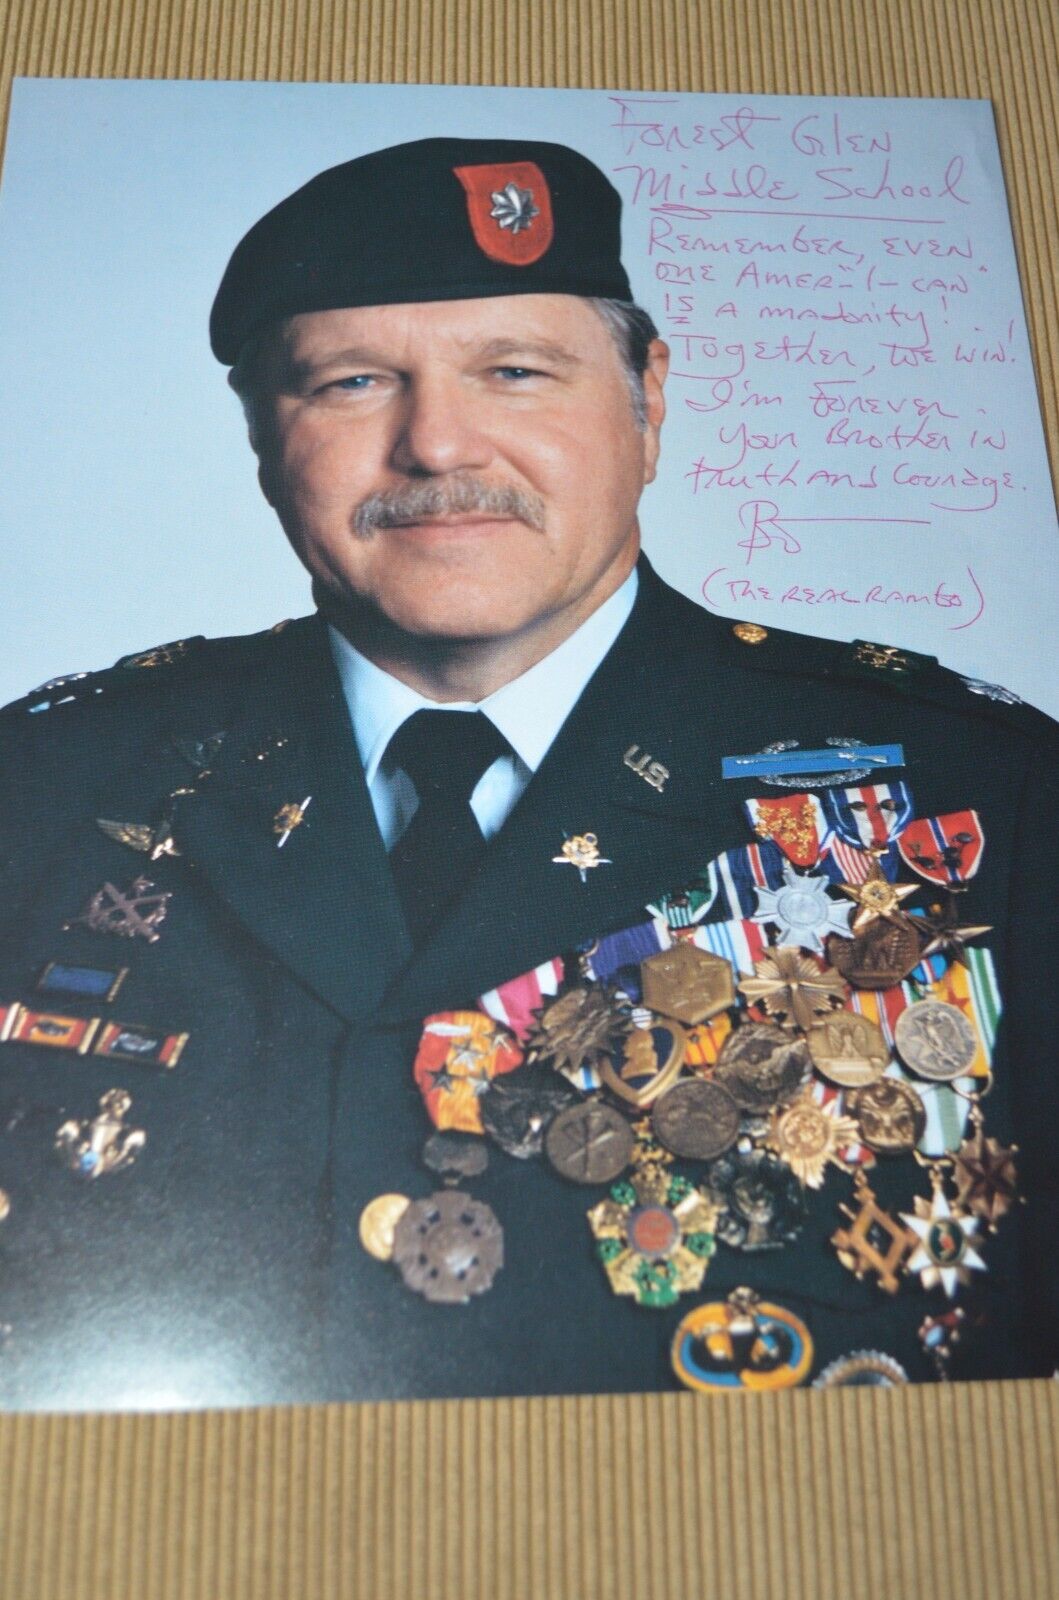 Col Bo Gritz Signed 8x10 Photo Vietnam Special Forces, heavily decorated